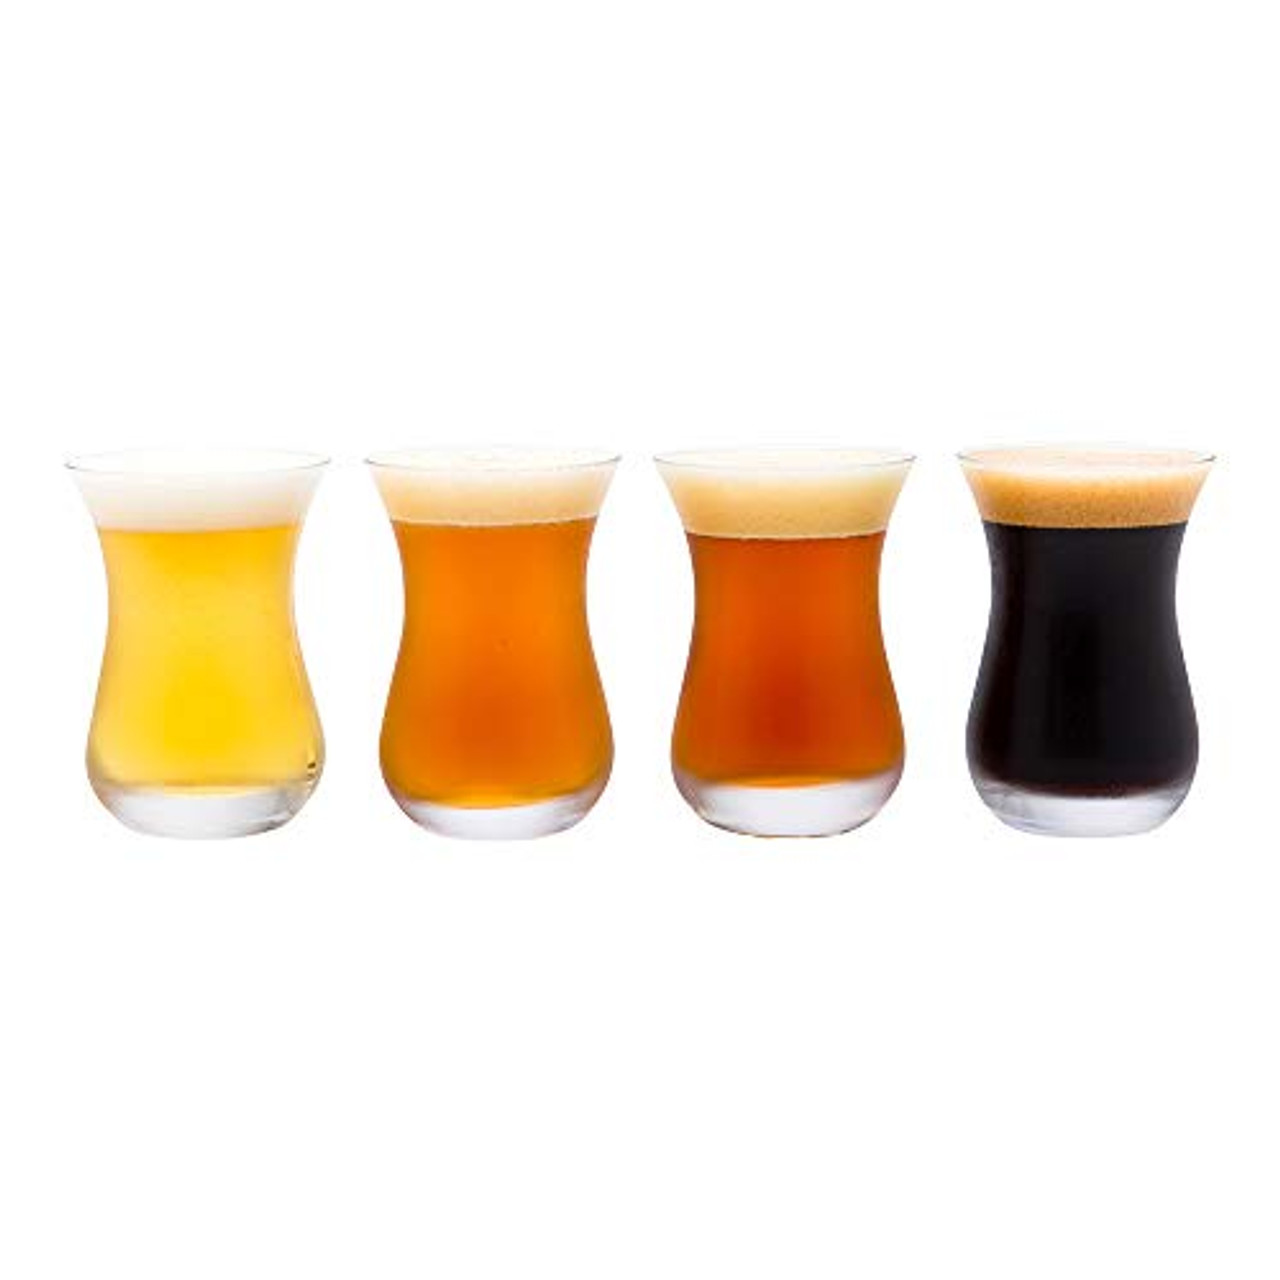 5 oz Beer Tasting Glasses, Beer Paddle Glasses, Small Beer Glass - 2 1/2 x  2 1/2 x 3 3/4 - 6 count box - Restaurantware